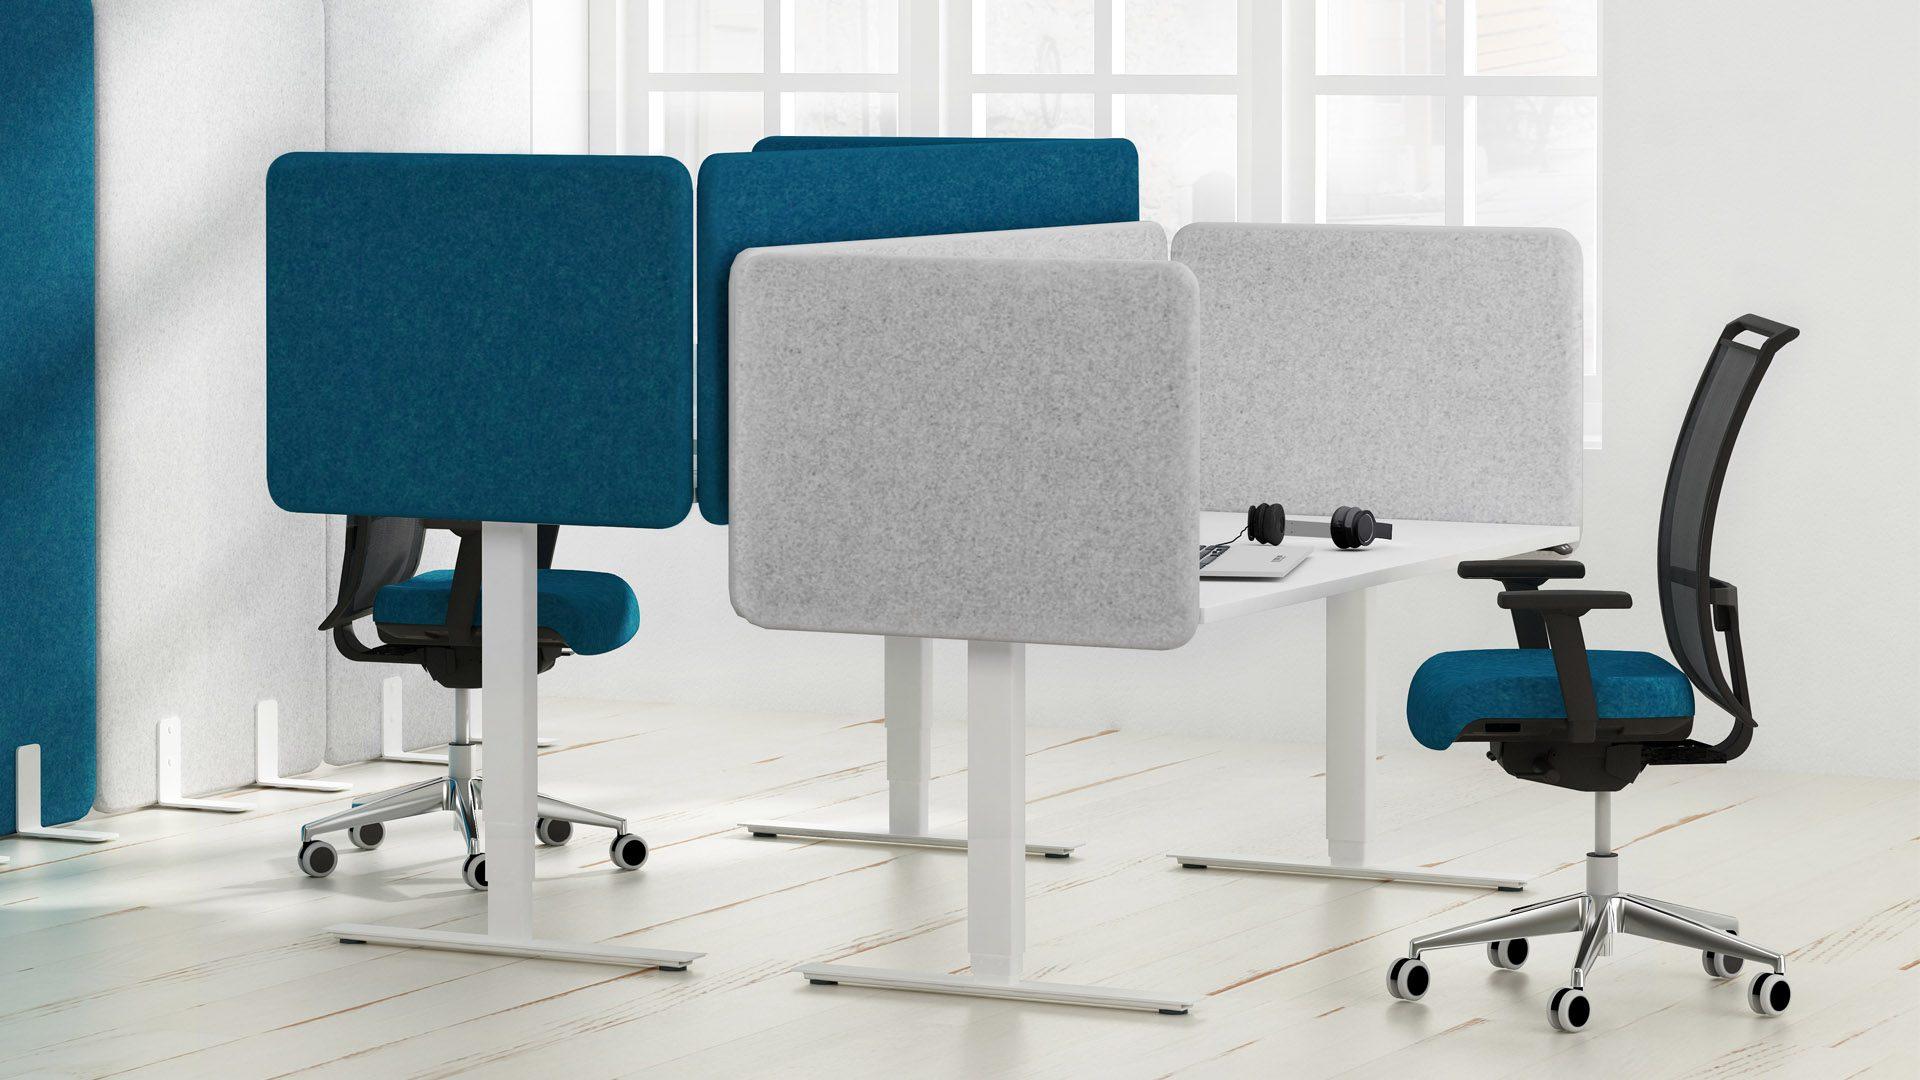 TOP 530 acoustic desk screens add privacy to your workplace and absorb background office noise.